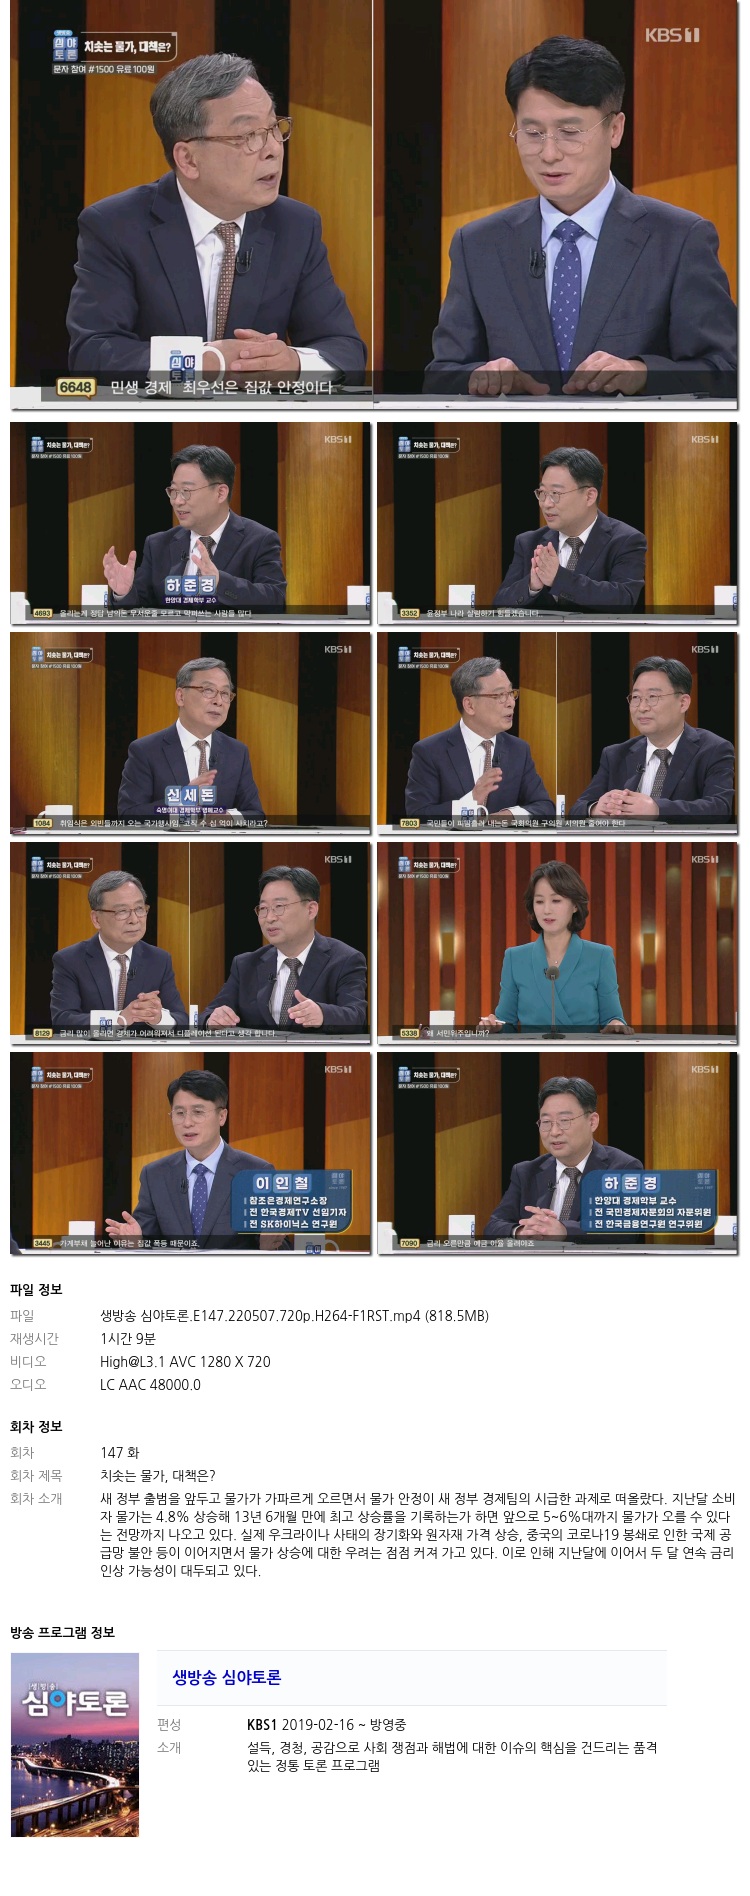 <img src="//img.filesun.com/common/diskview/ico_alliance_32x17.png" class="allianceicon" width="32" height="17" />
								                                                                [생방송 심야토론] EP.147화.220507.720p